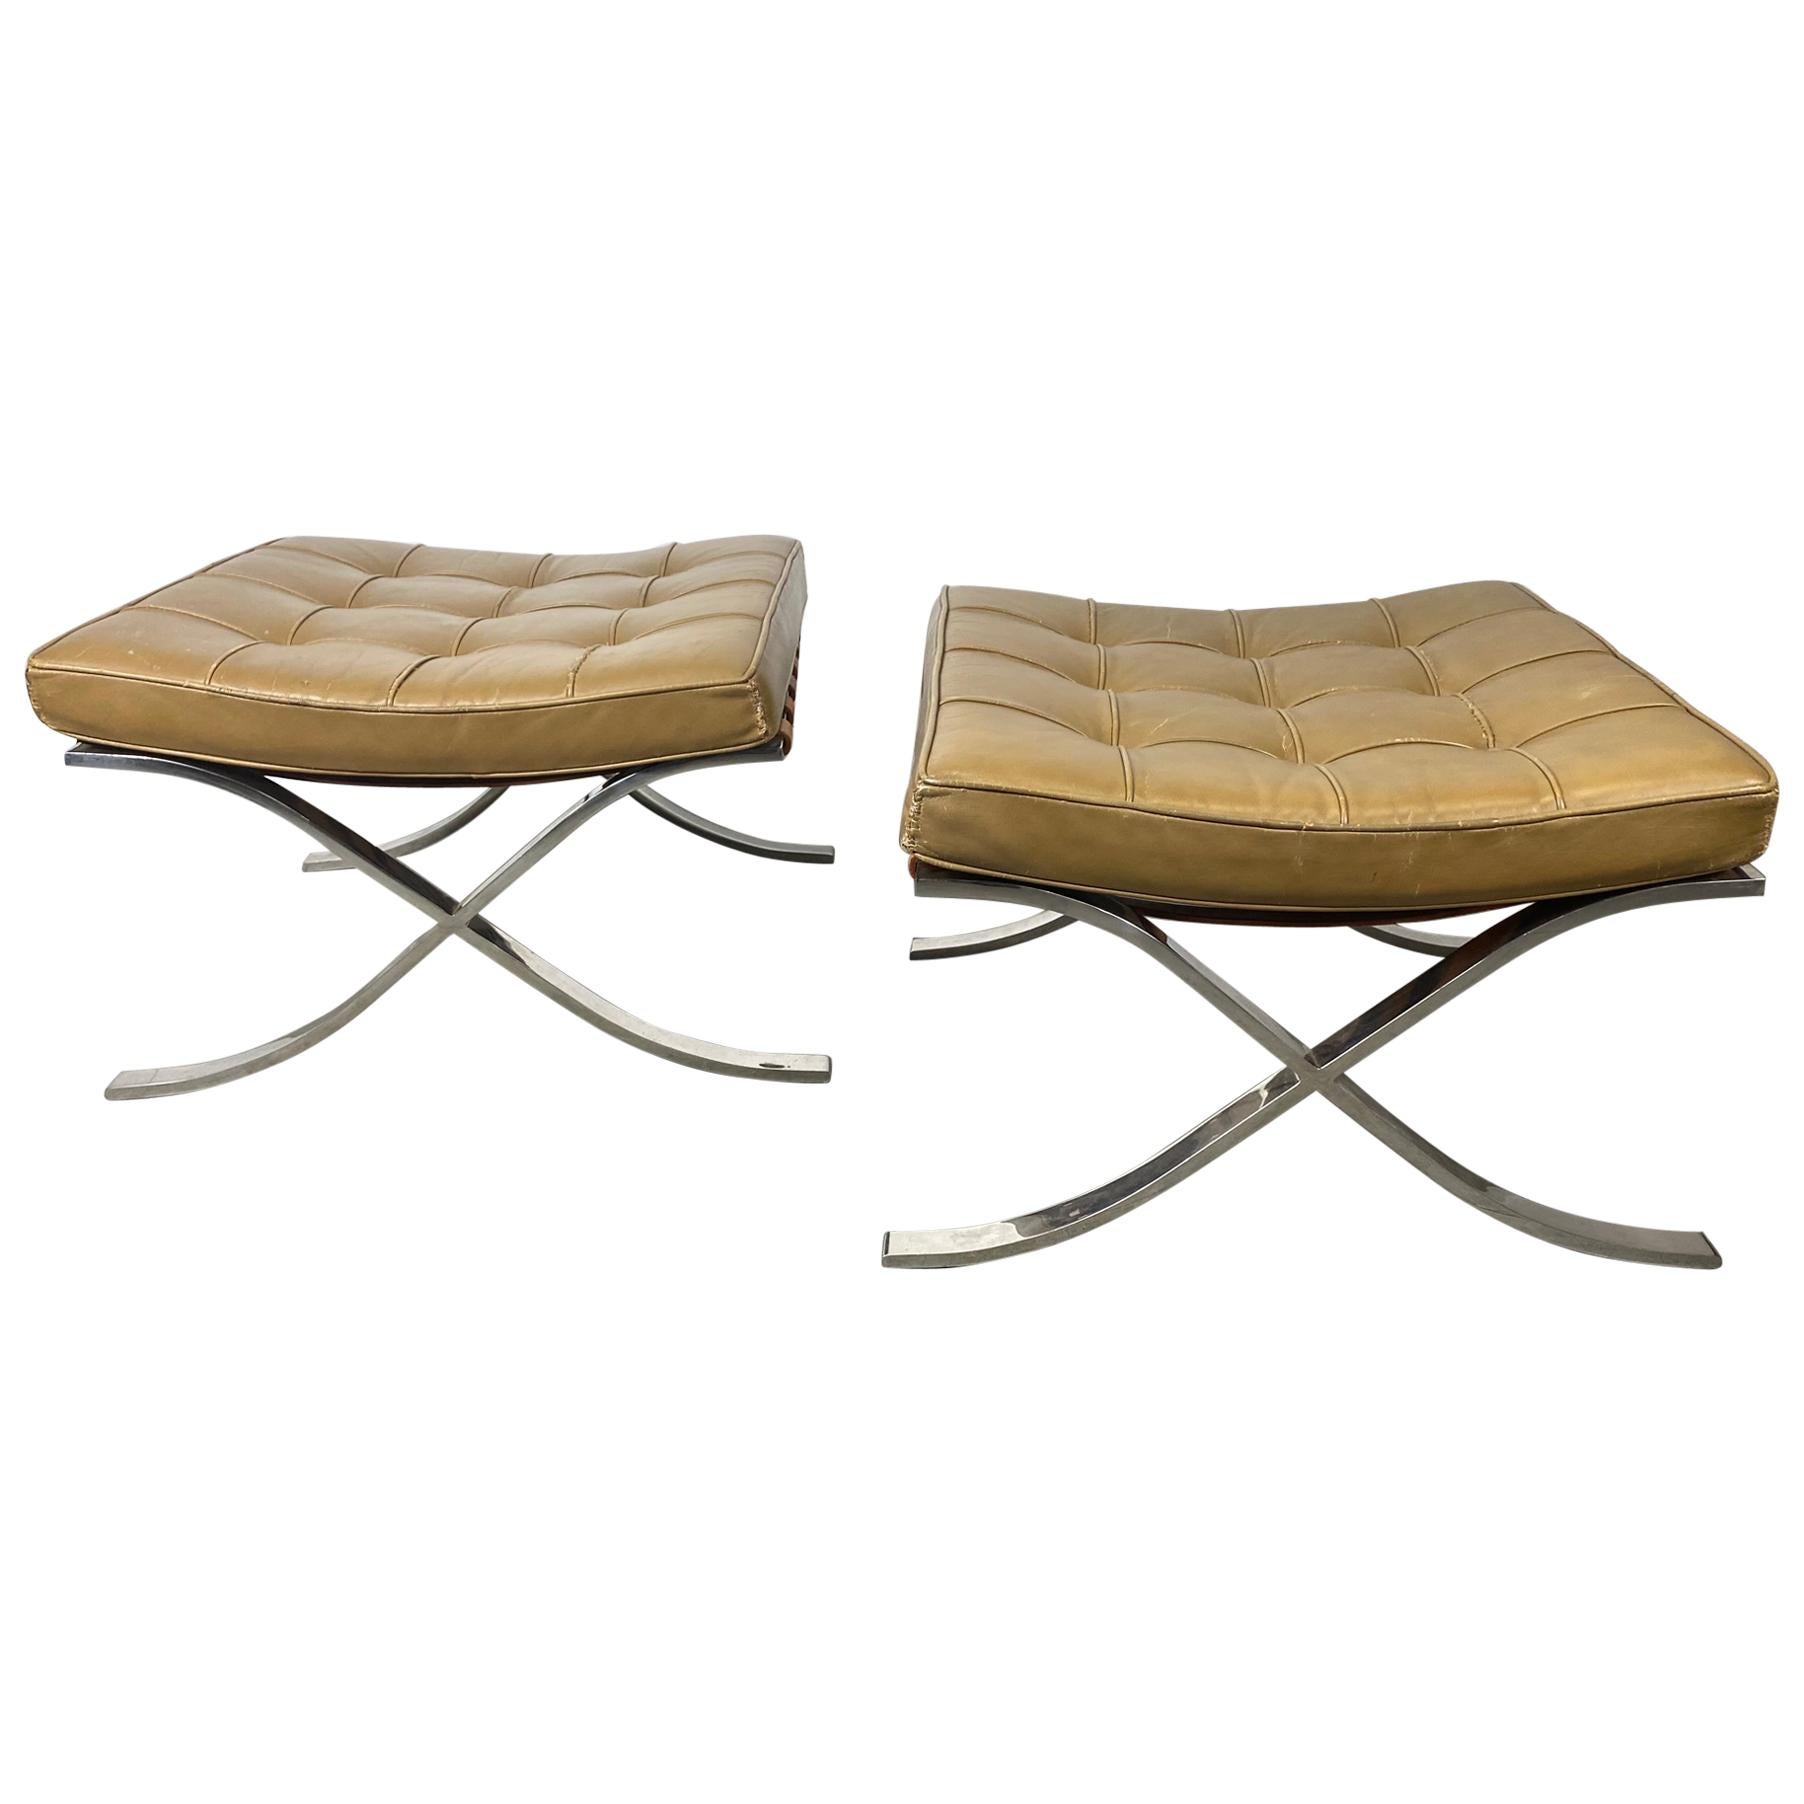 Rare Barcelona Ottomans by Mies van der Rohe for G.R. Griffith, Original Label For Sale